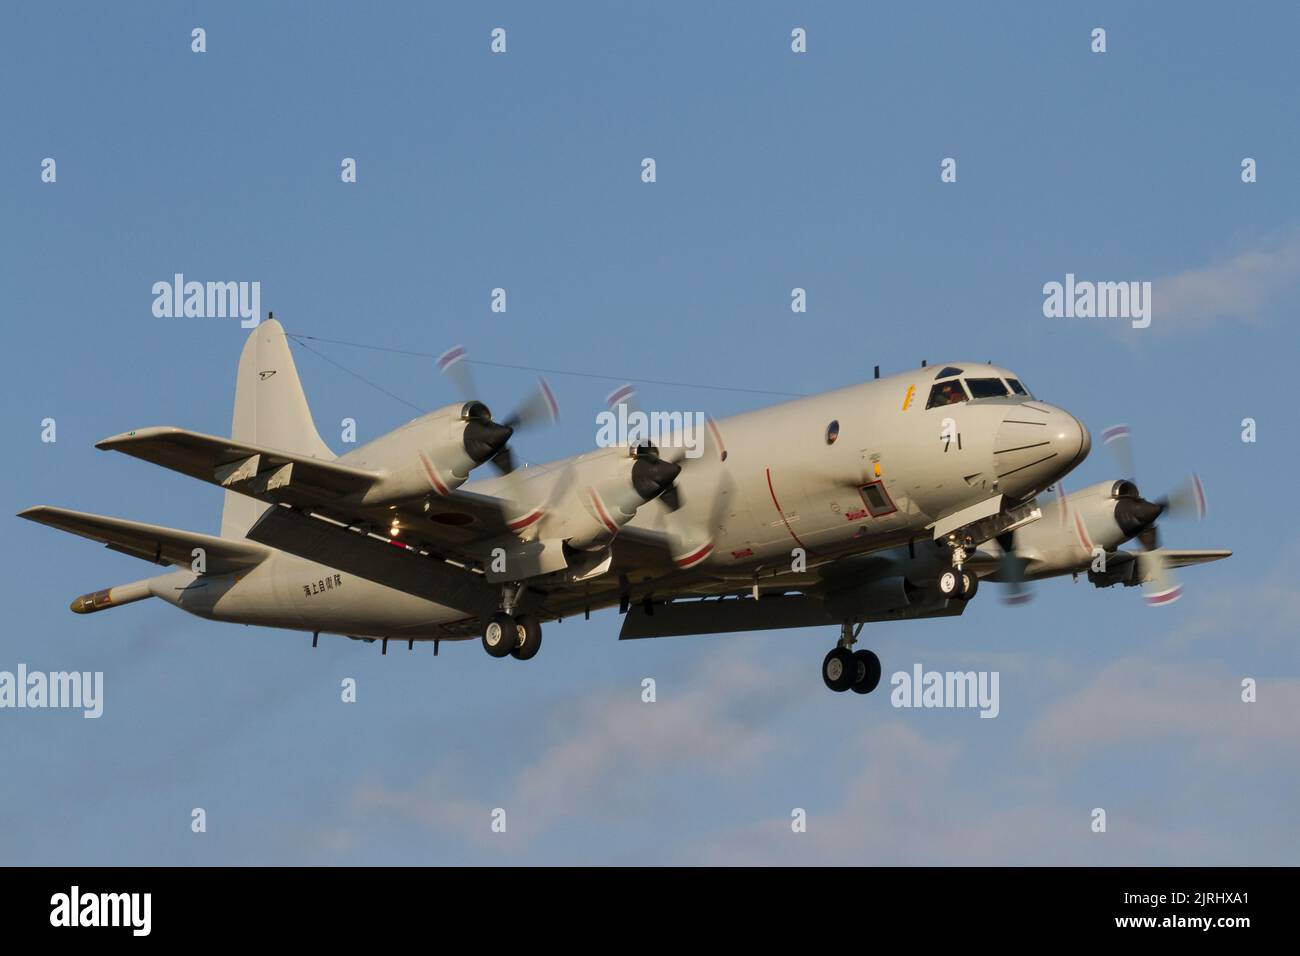 Lockheed P-3C Orion Maritime reconnaissance aircraft with the Japanese Maritime Self Defence Force (JSDF) flying near Atsugi Naval Air Facility, Japan Stock Photo